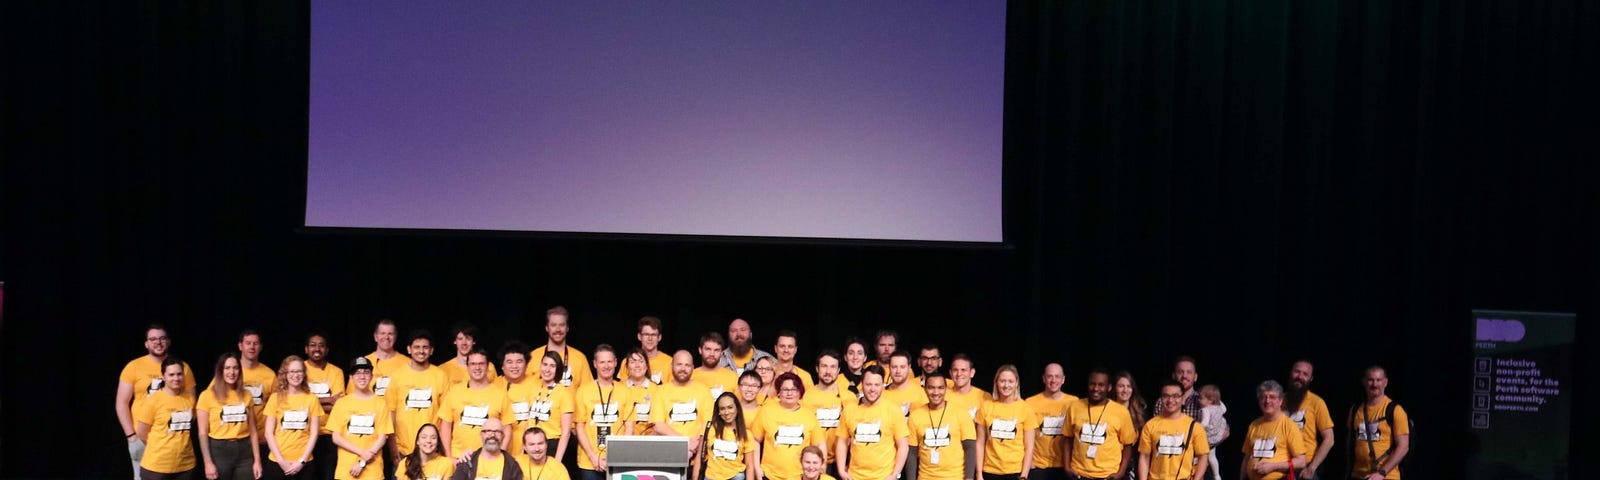 Over 50 people on a large stage all wearing yellow shirts that say “DDD Perth 2019 Team”. Some people in the front are kneeling. The majority of people are standing in multiple rows. There is a lectern in the front with a DDD Perth banner on it.